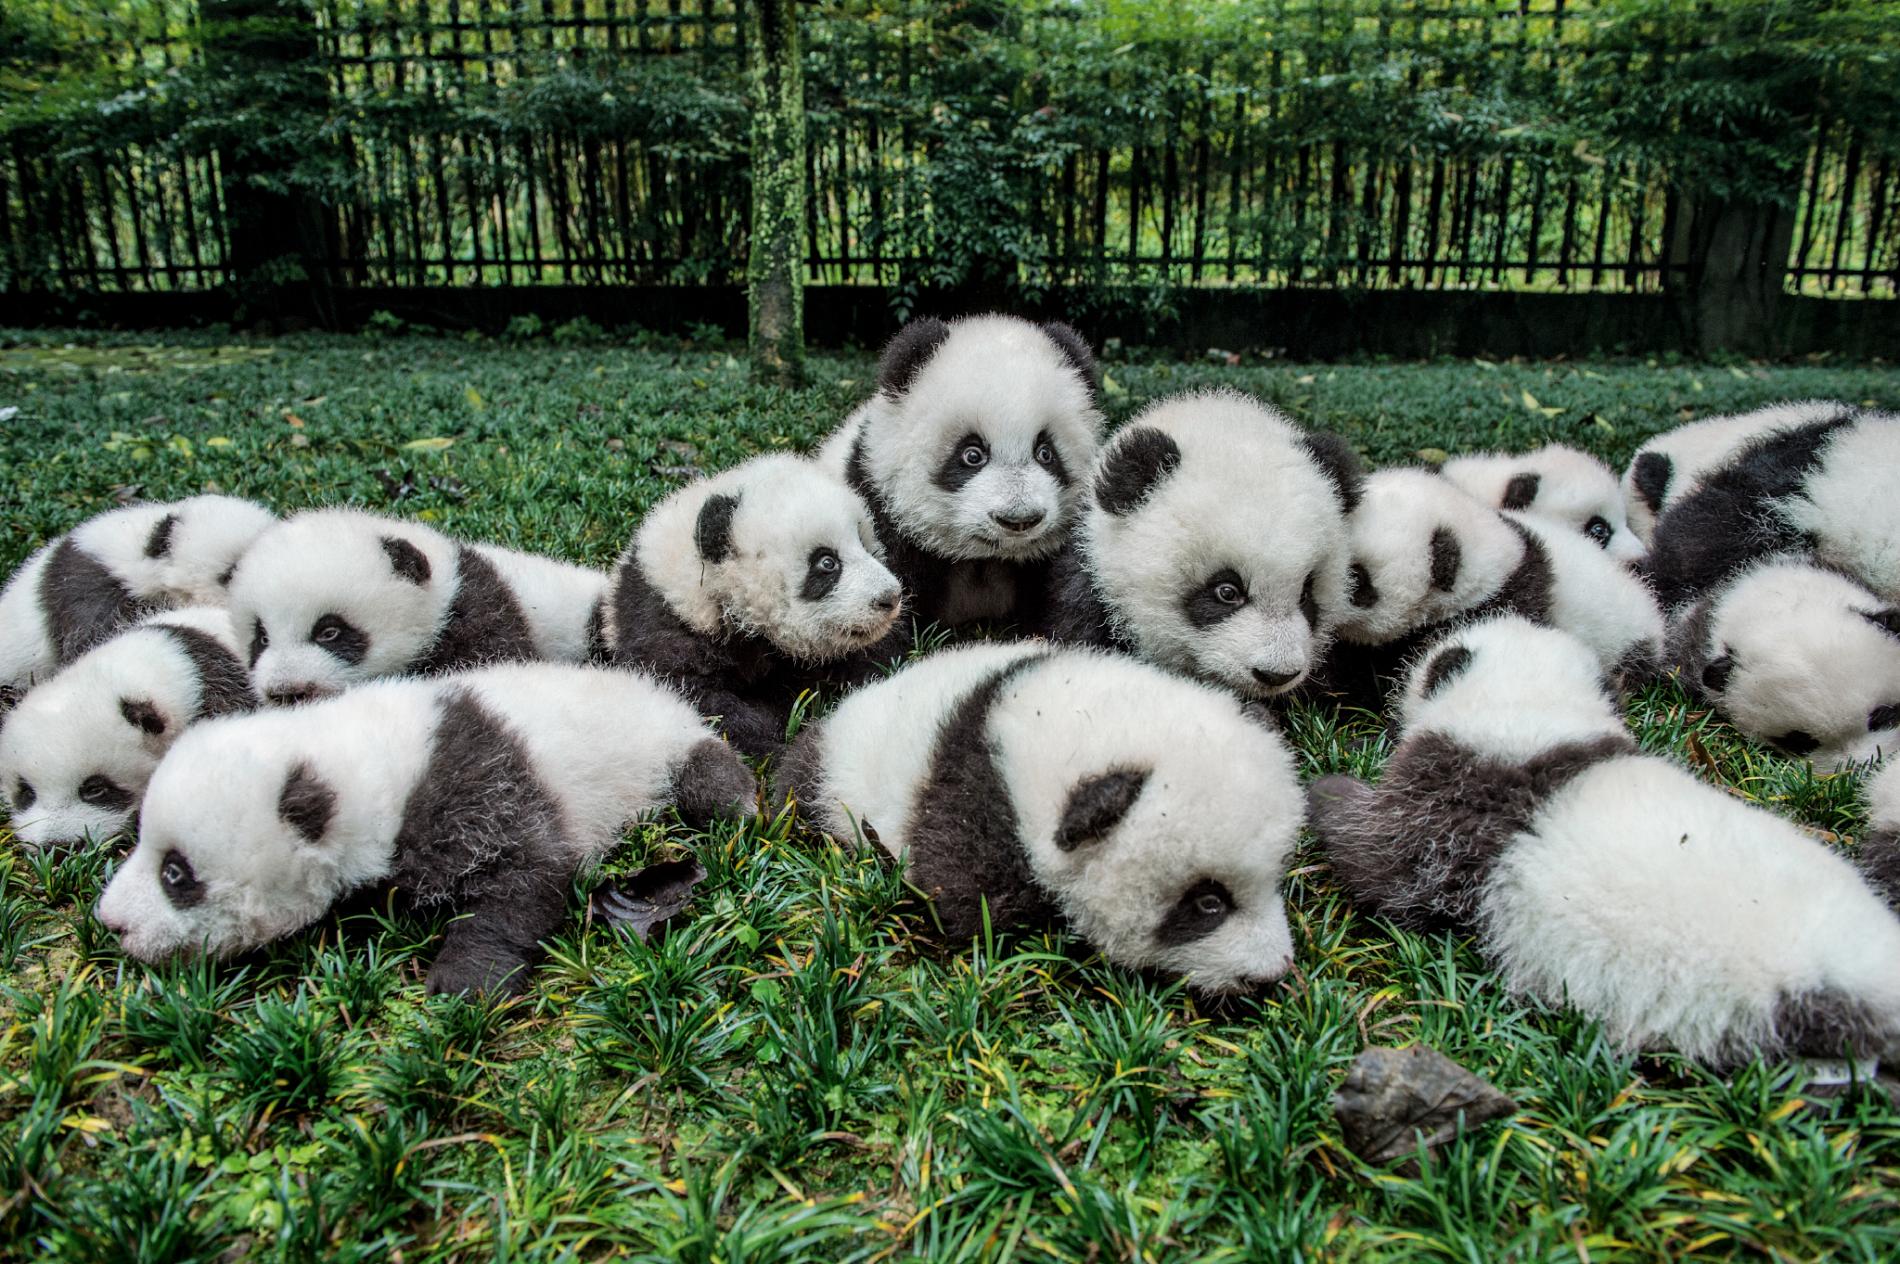 Who Discovered the Panda?